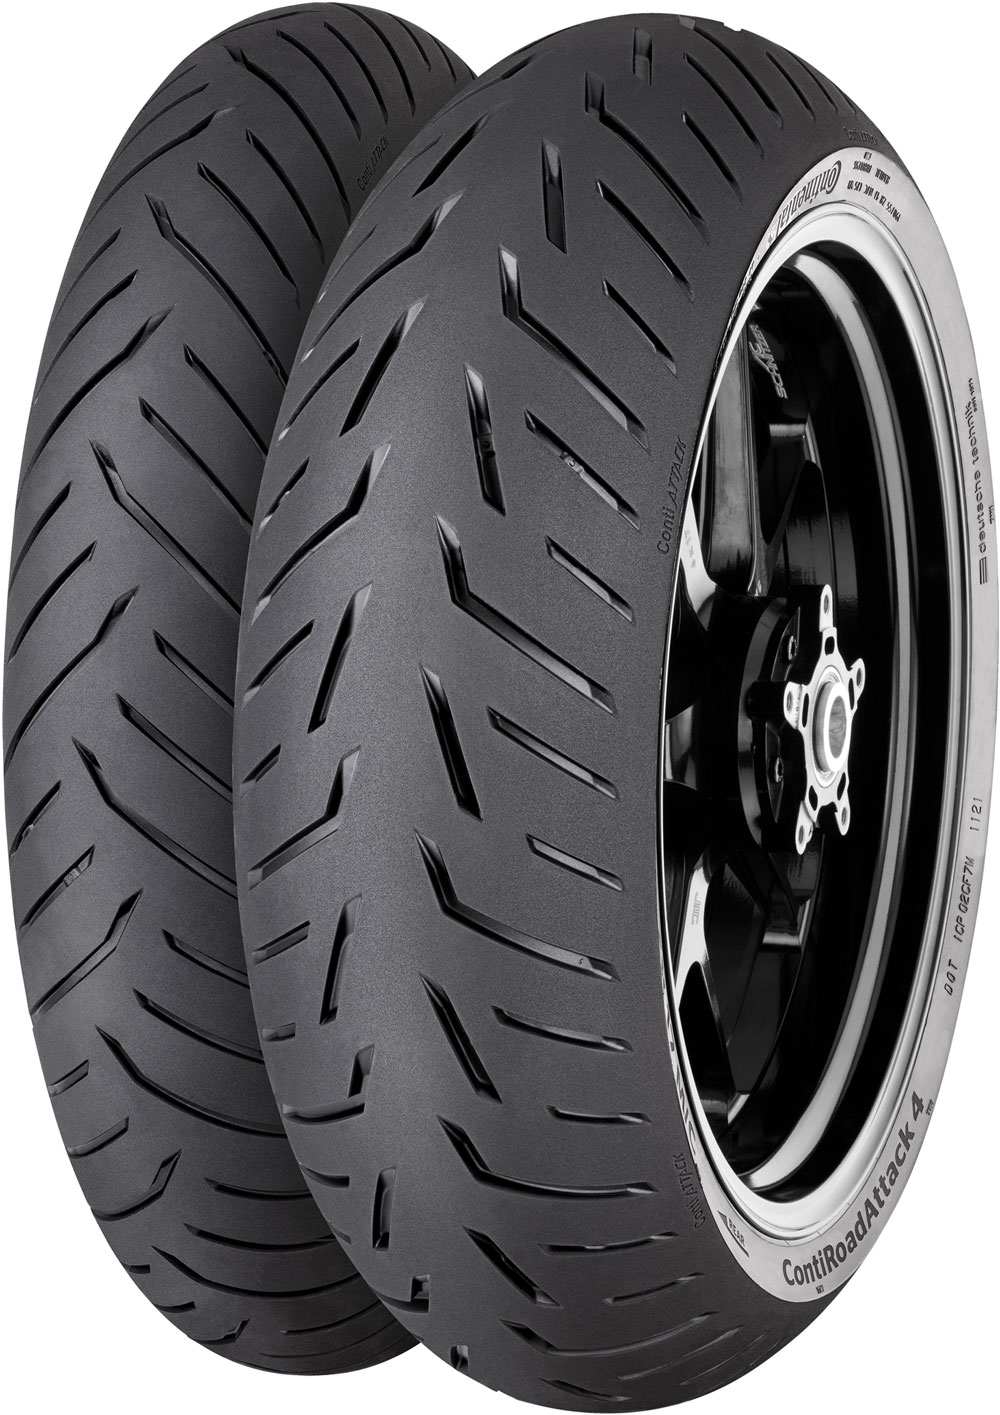 product_type-moto_tires CONTINENTAL RDATTACK4 160/60 R17 69W